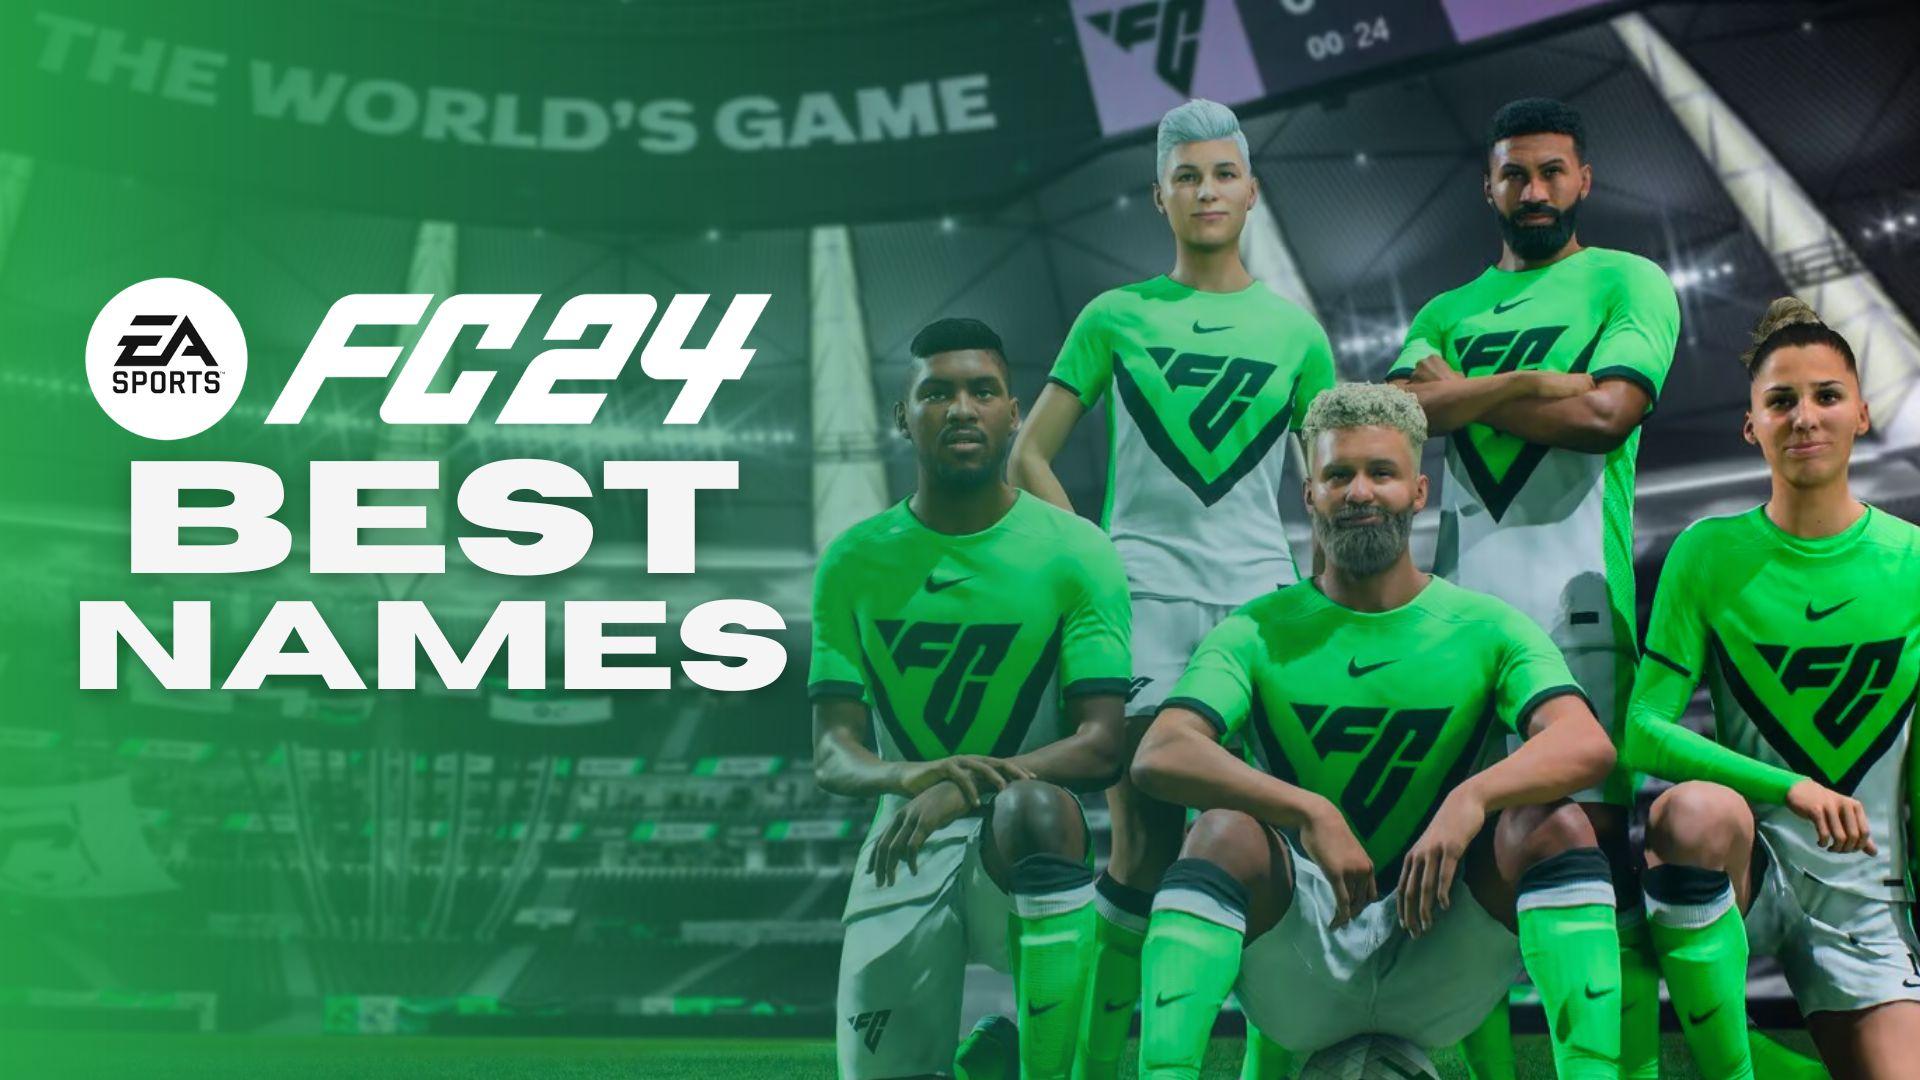 EA FC players in green kit kneeling next to logo and text